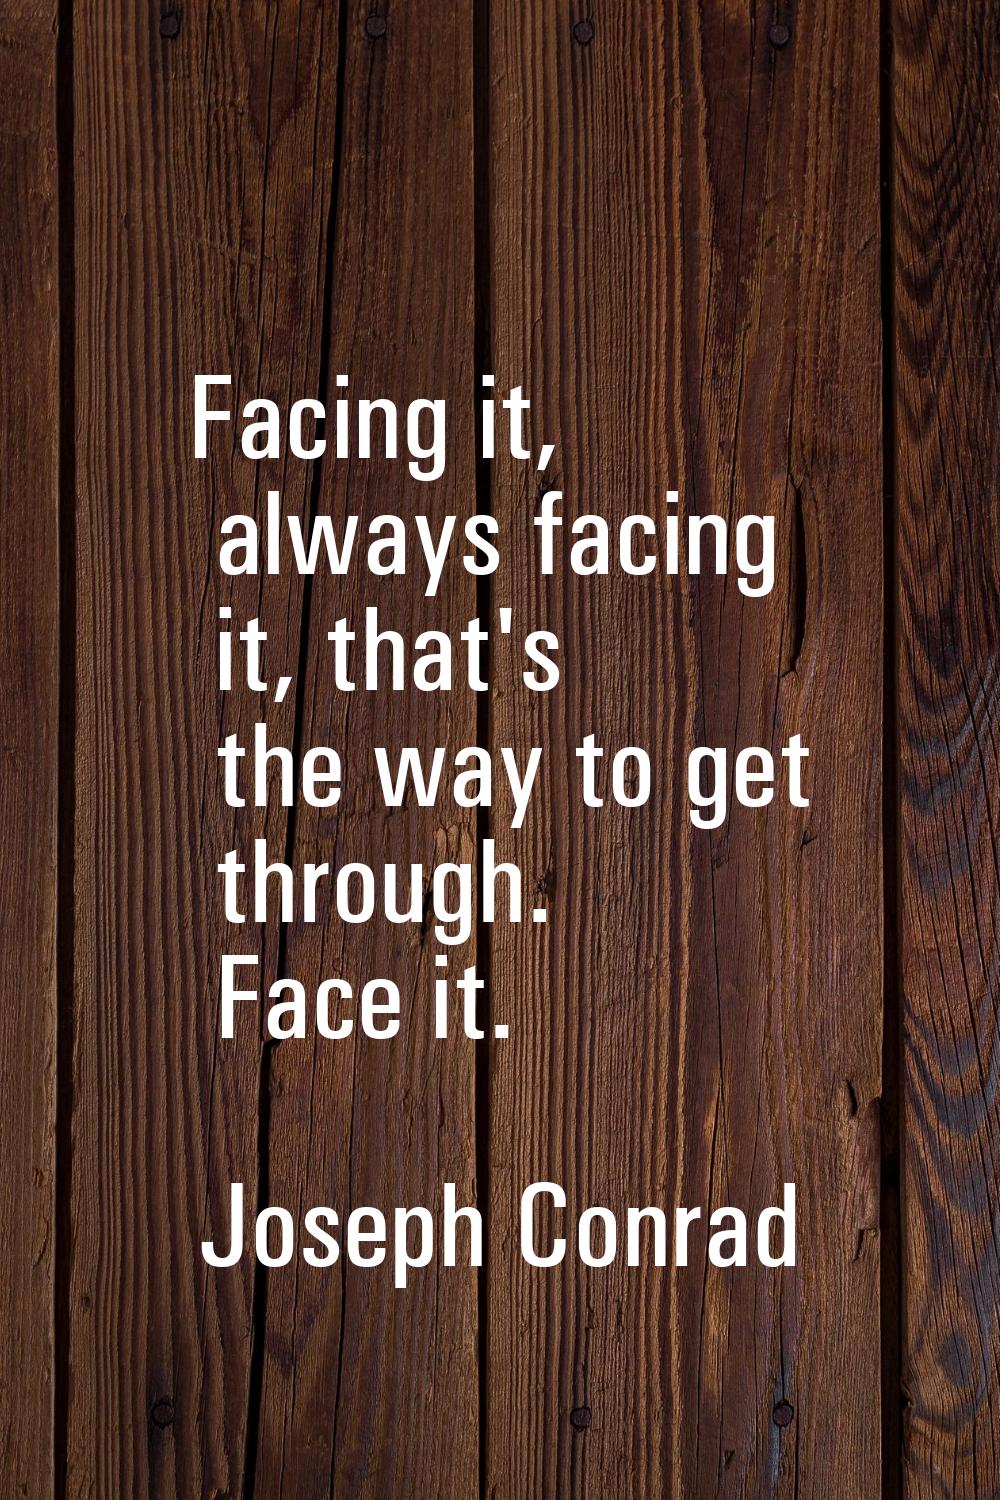 Facing it, always facing it, that's the way to get through. Face it.